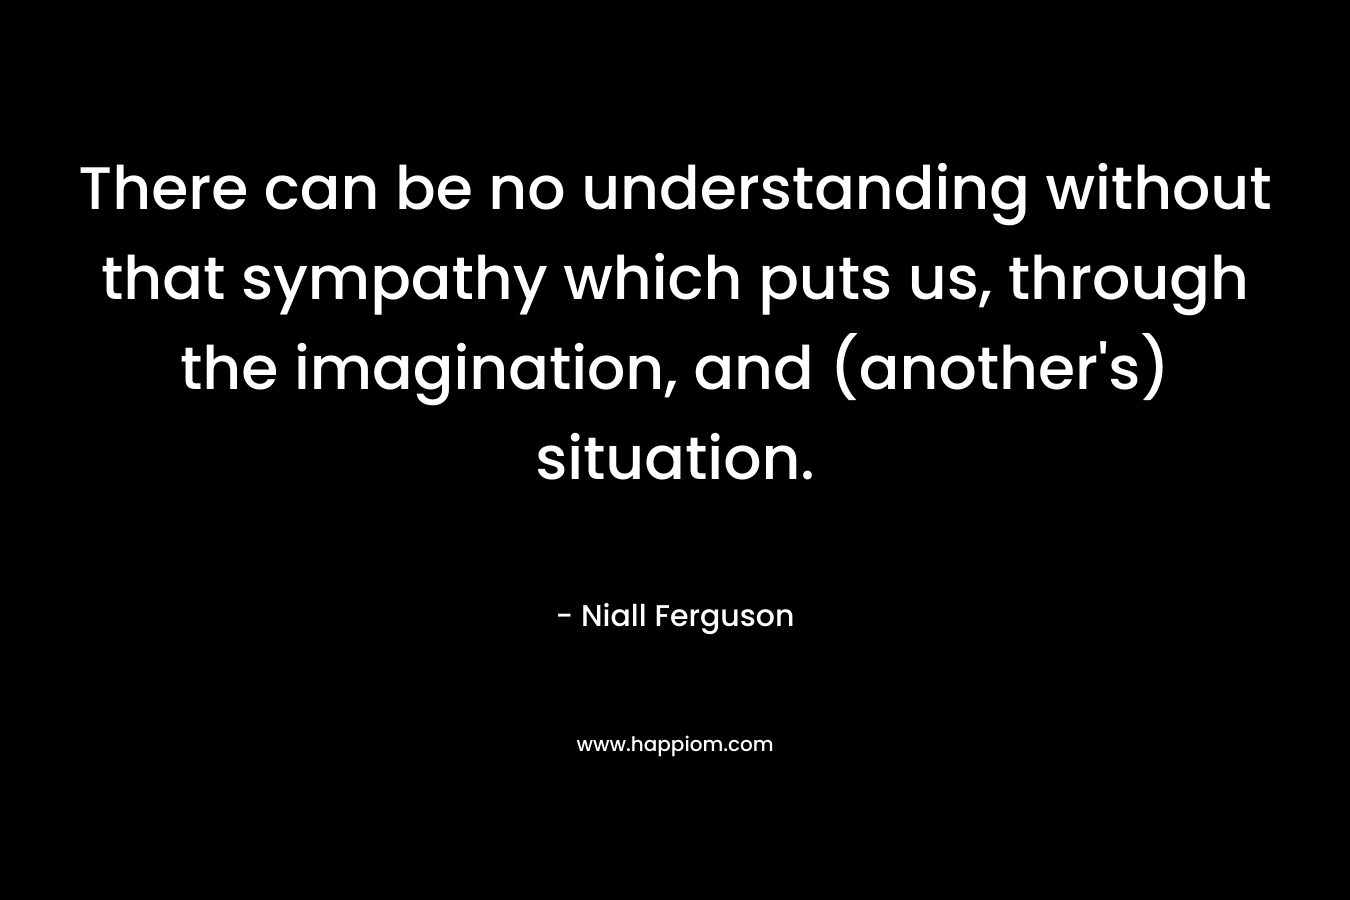 There can be no understanding without that sympathy which puts us, through the imagination, and (another's) situation.